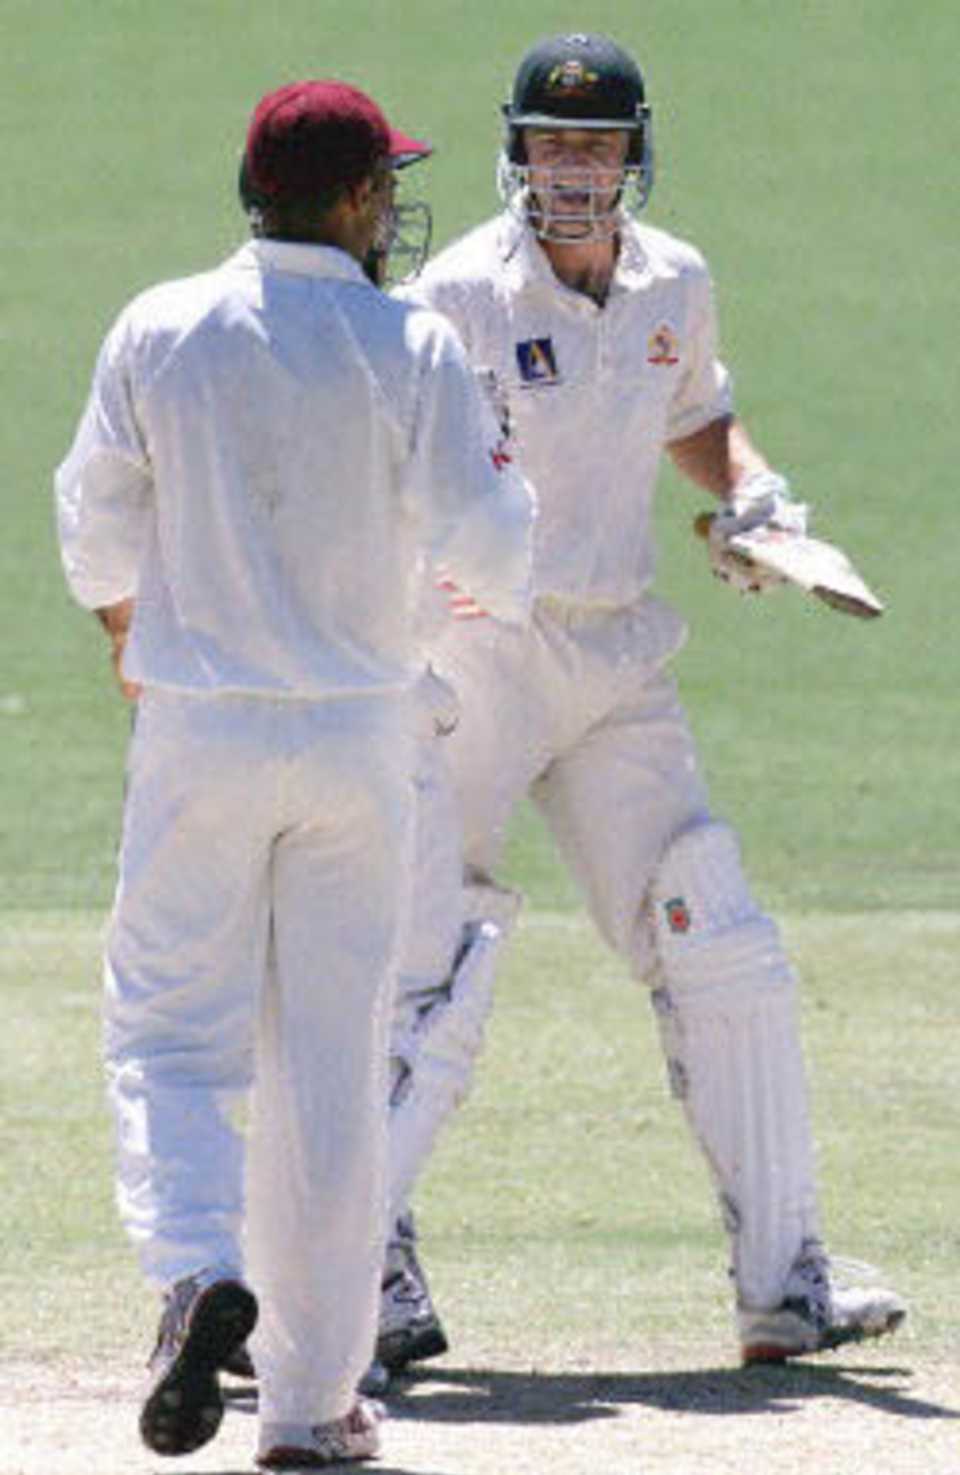 Australian test cricket captain Adam Gilchrist (R) shakes hands with West Indies captain Jimmy Adams (red cap), after Australia's five wicket win in the third test at the Adelaide Oval, 19 December 2000. The win is the first for stand in captain Gilchrist who replaced the injured Steve Waugh for this match, and extends Australia's world record unbeaten run to 13.